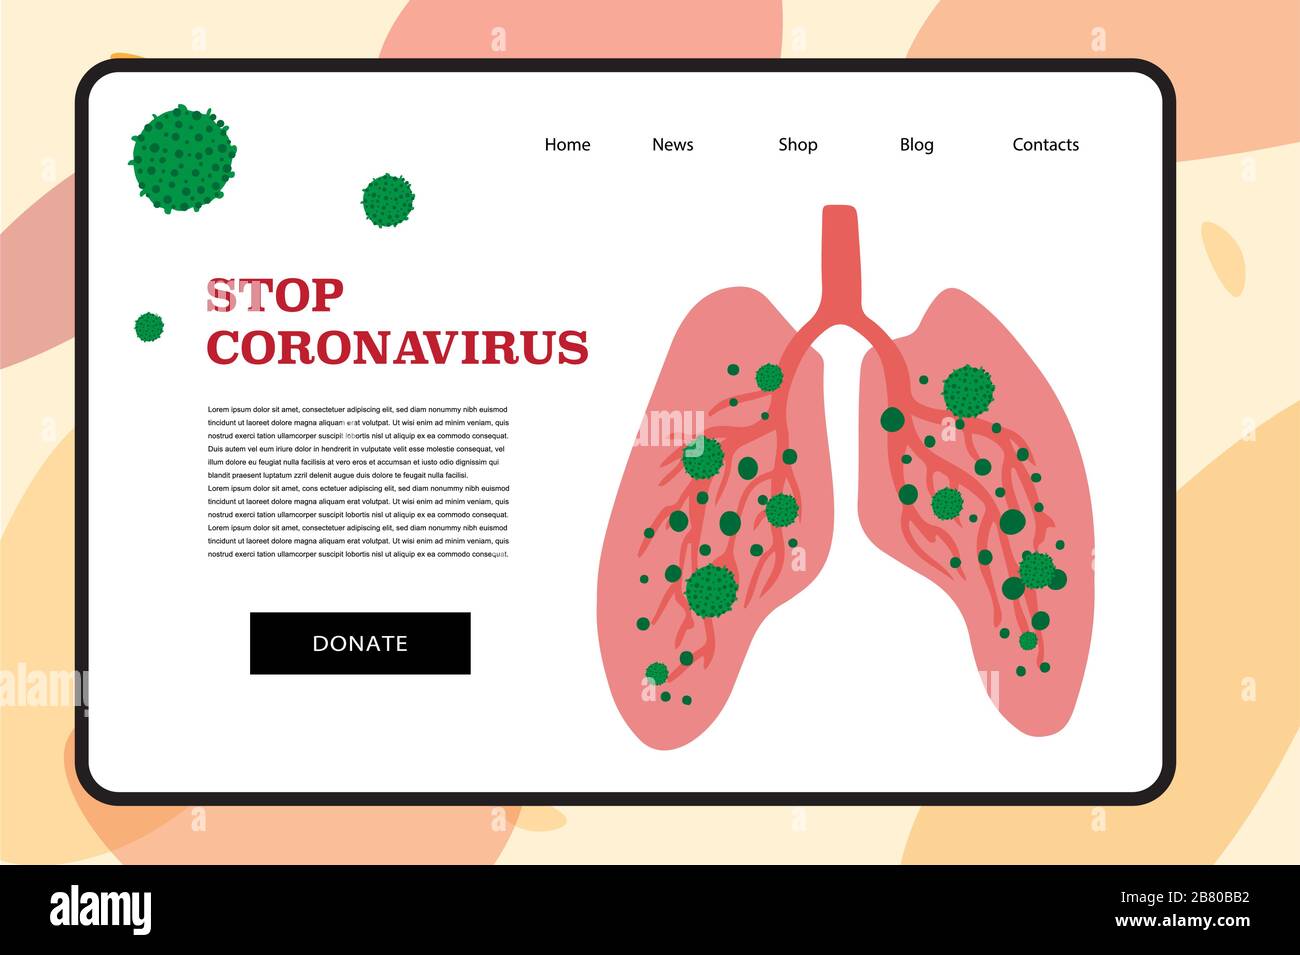 Caution site for coronavirus 2019-nC0V outbreak. Stop pandemic COVID-19 microbe. The virus attacks the respiratory tract, infections medical health risk. Travel Alert concept. Flat cartoon style Stock Vector